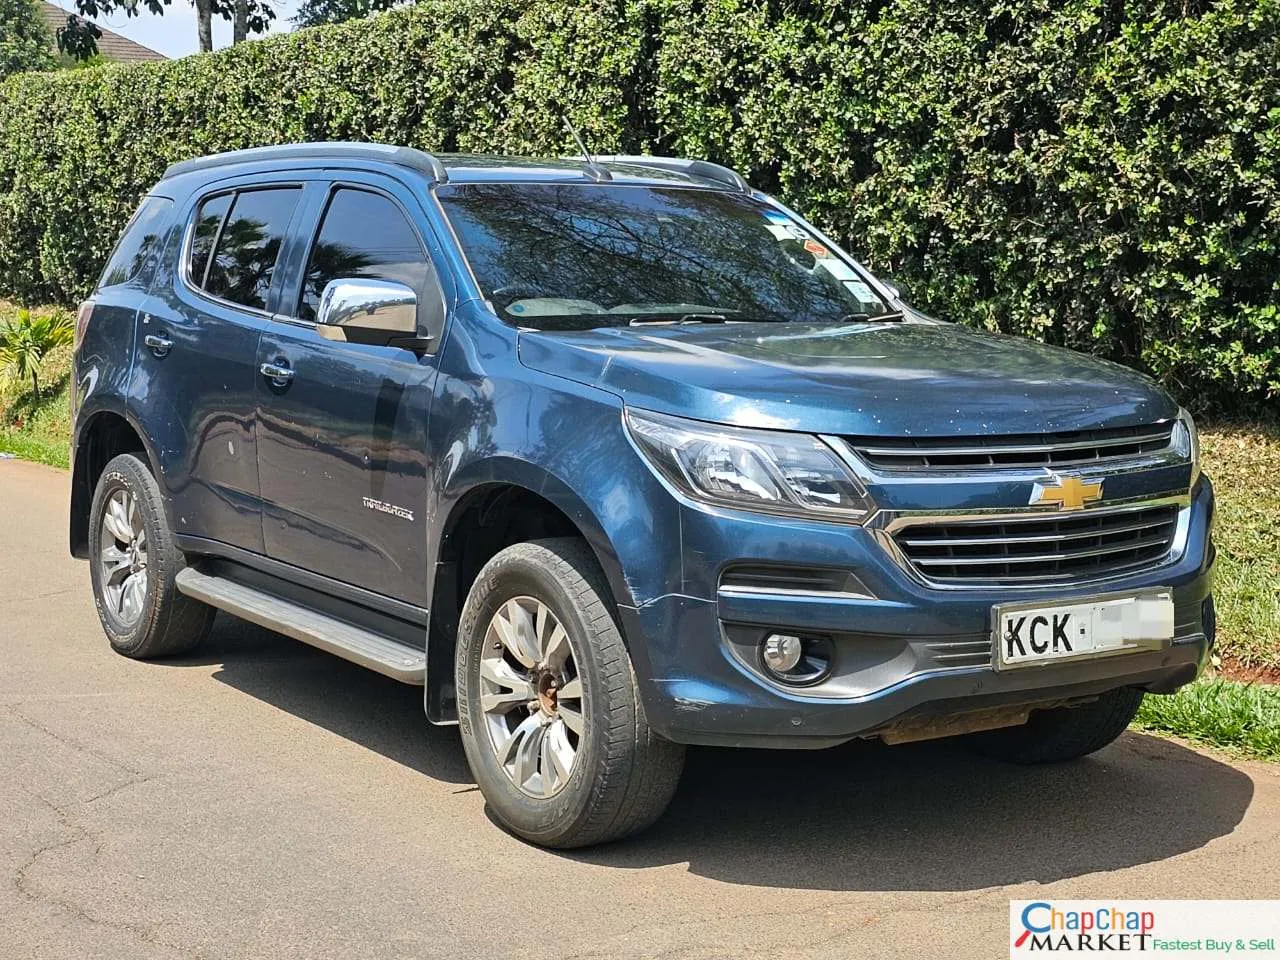 Chevrolet Trailblazer for sale in Kenya You Pay 30% Deposit Trade in OK EXCLUSIVE hire purchase installments